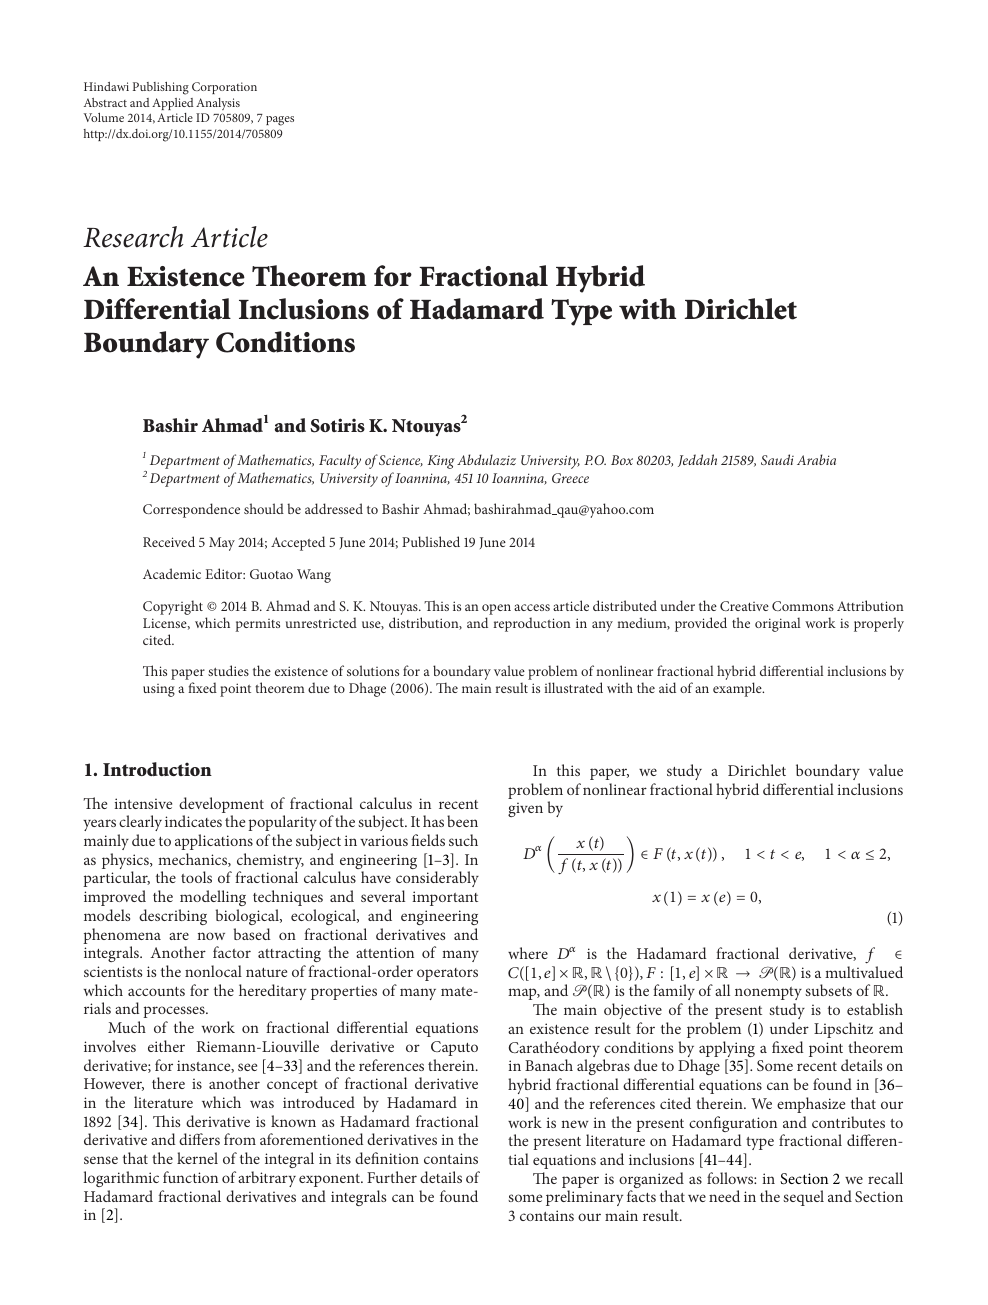 An Existence Theorem For Fractional Hybrid Differential Inclusions Of Hadamard Type With Dirichlet Boundary Conditions Topic Of Research Paper In Mathematics Download Scholarly Article Pdf And Read For Free On Cyberleninka